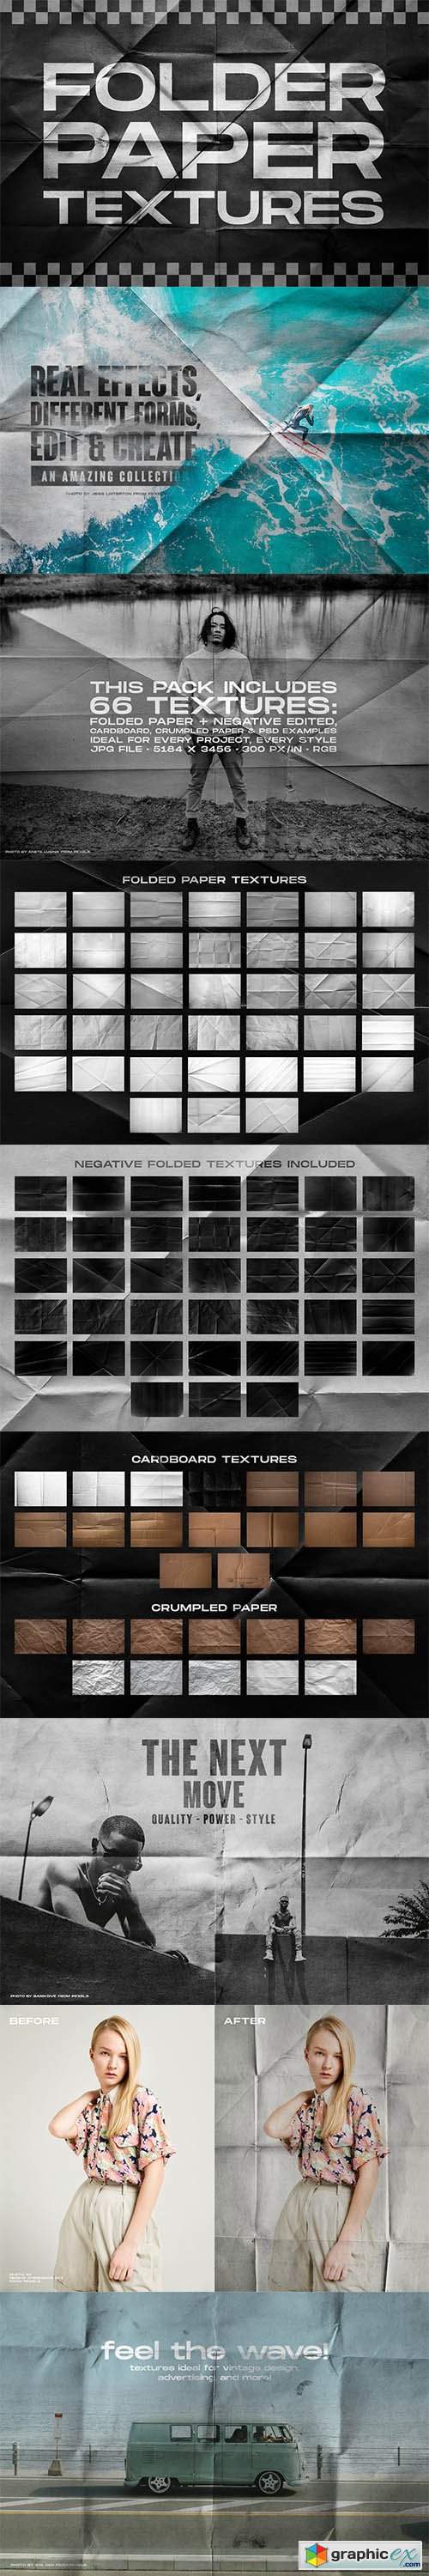 Folded paper textures collection